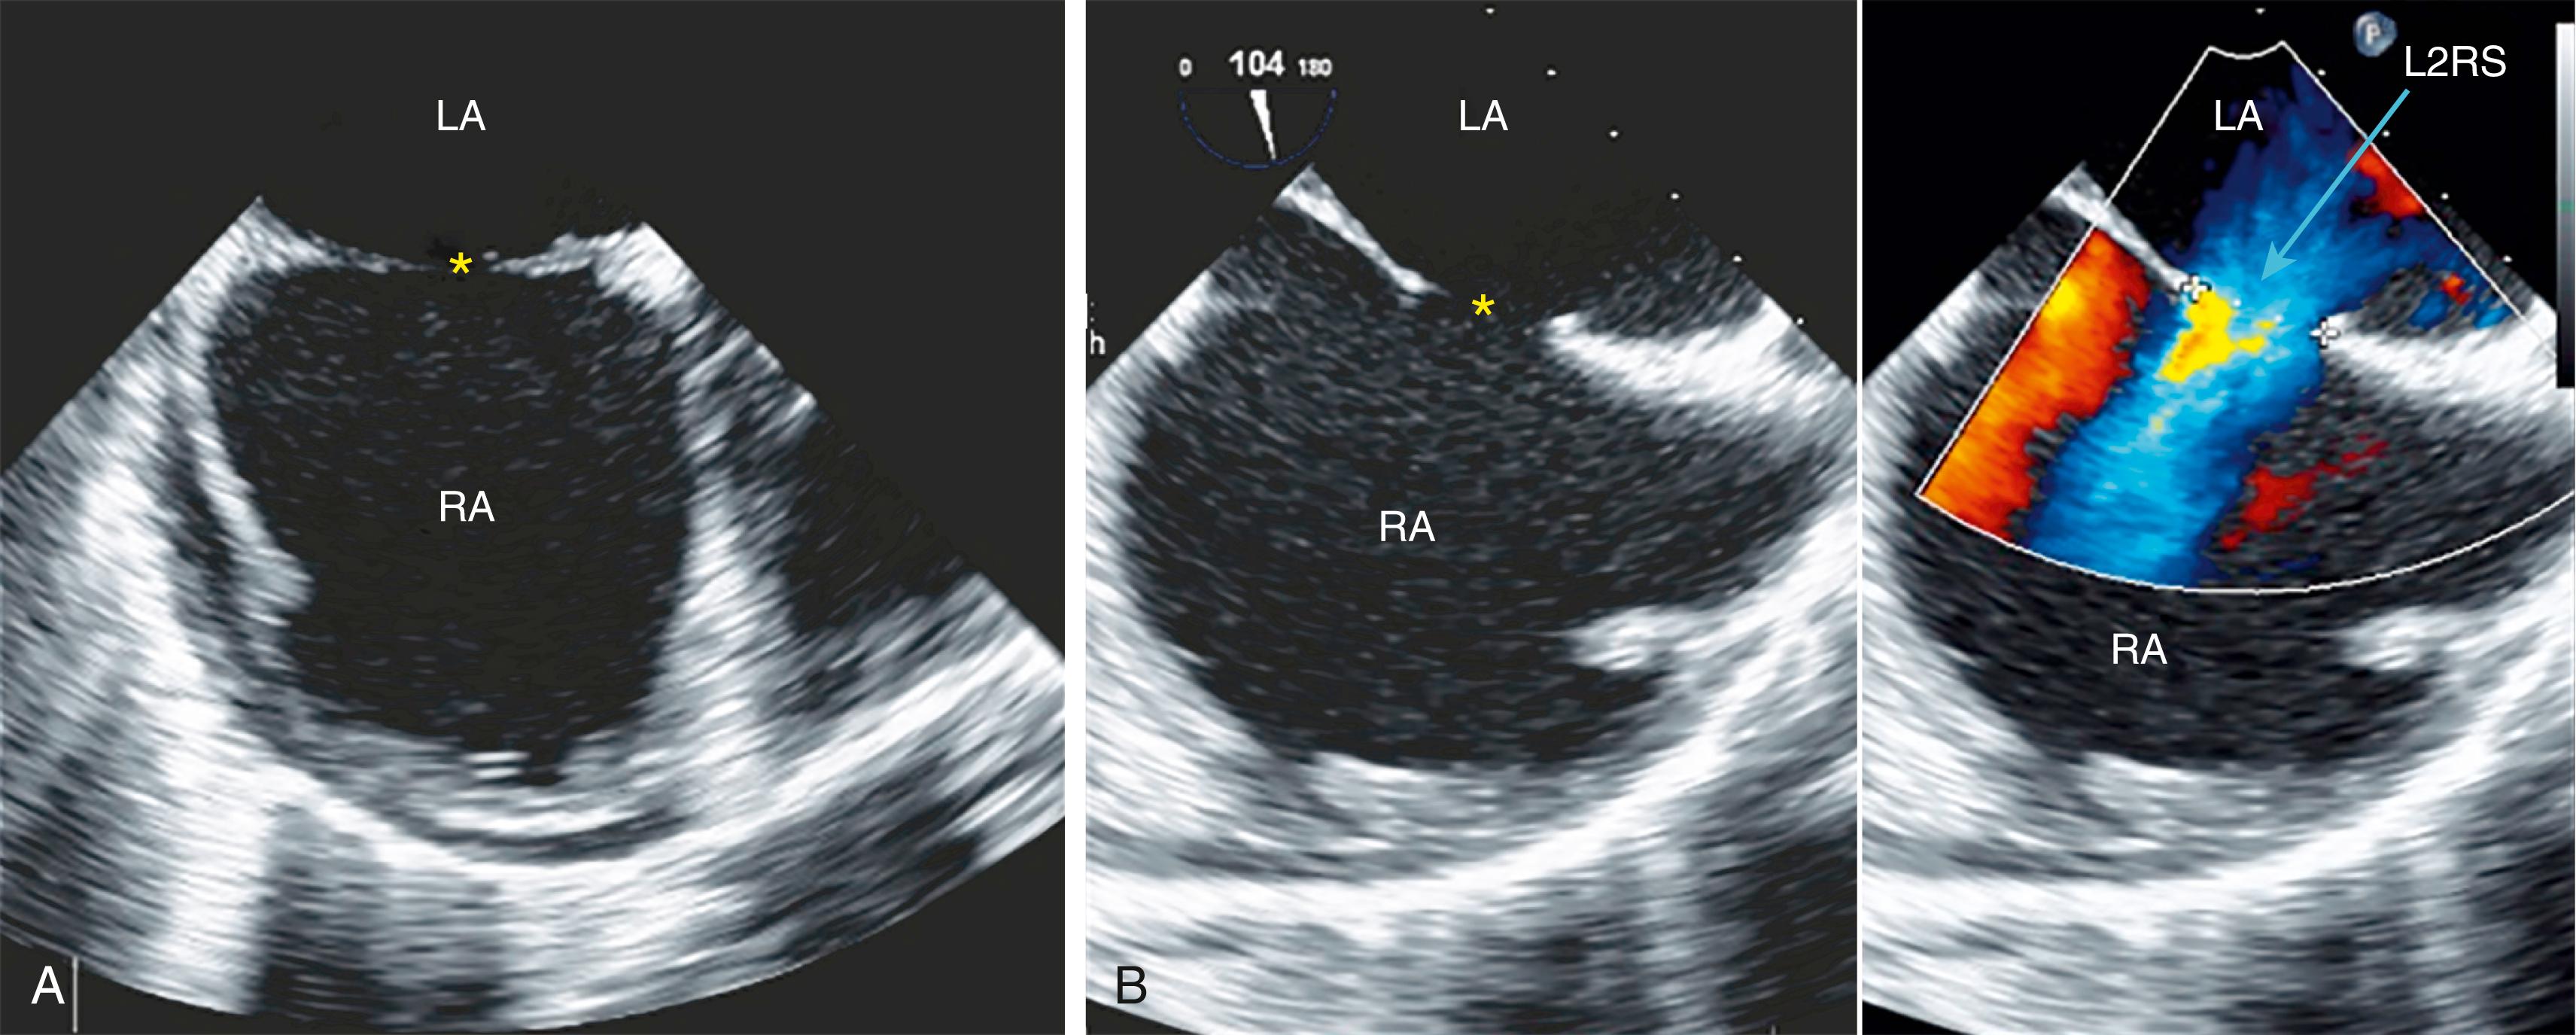 Figure 141.1, Secundum atrial septal defect (asterisk) visualized in the short-axis ( A ) and long-axis ( B ) views by transesophageal echocardiography. Color Doppler imaging shows the left-to-right shunt (L2RS). LA, Left atrium; RA, right atrium.